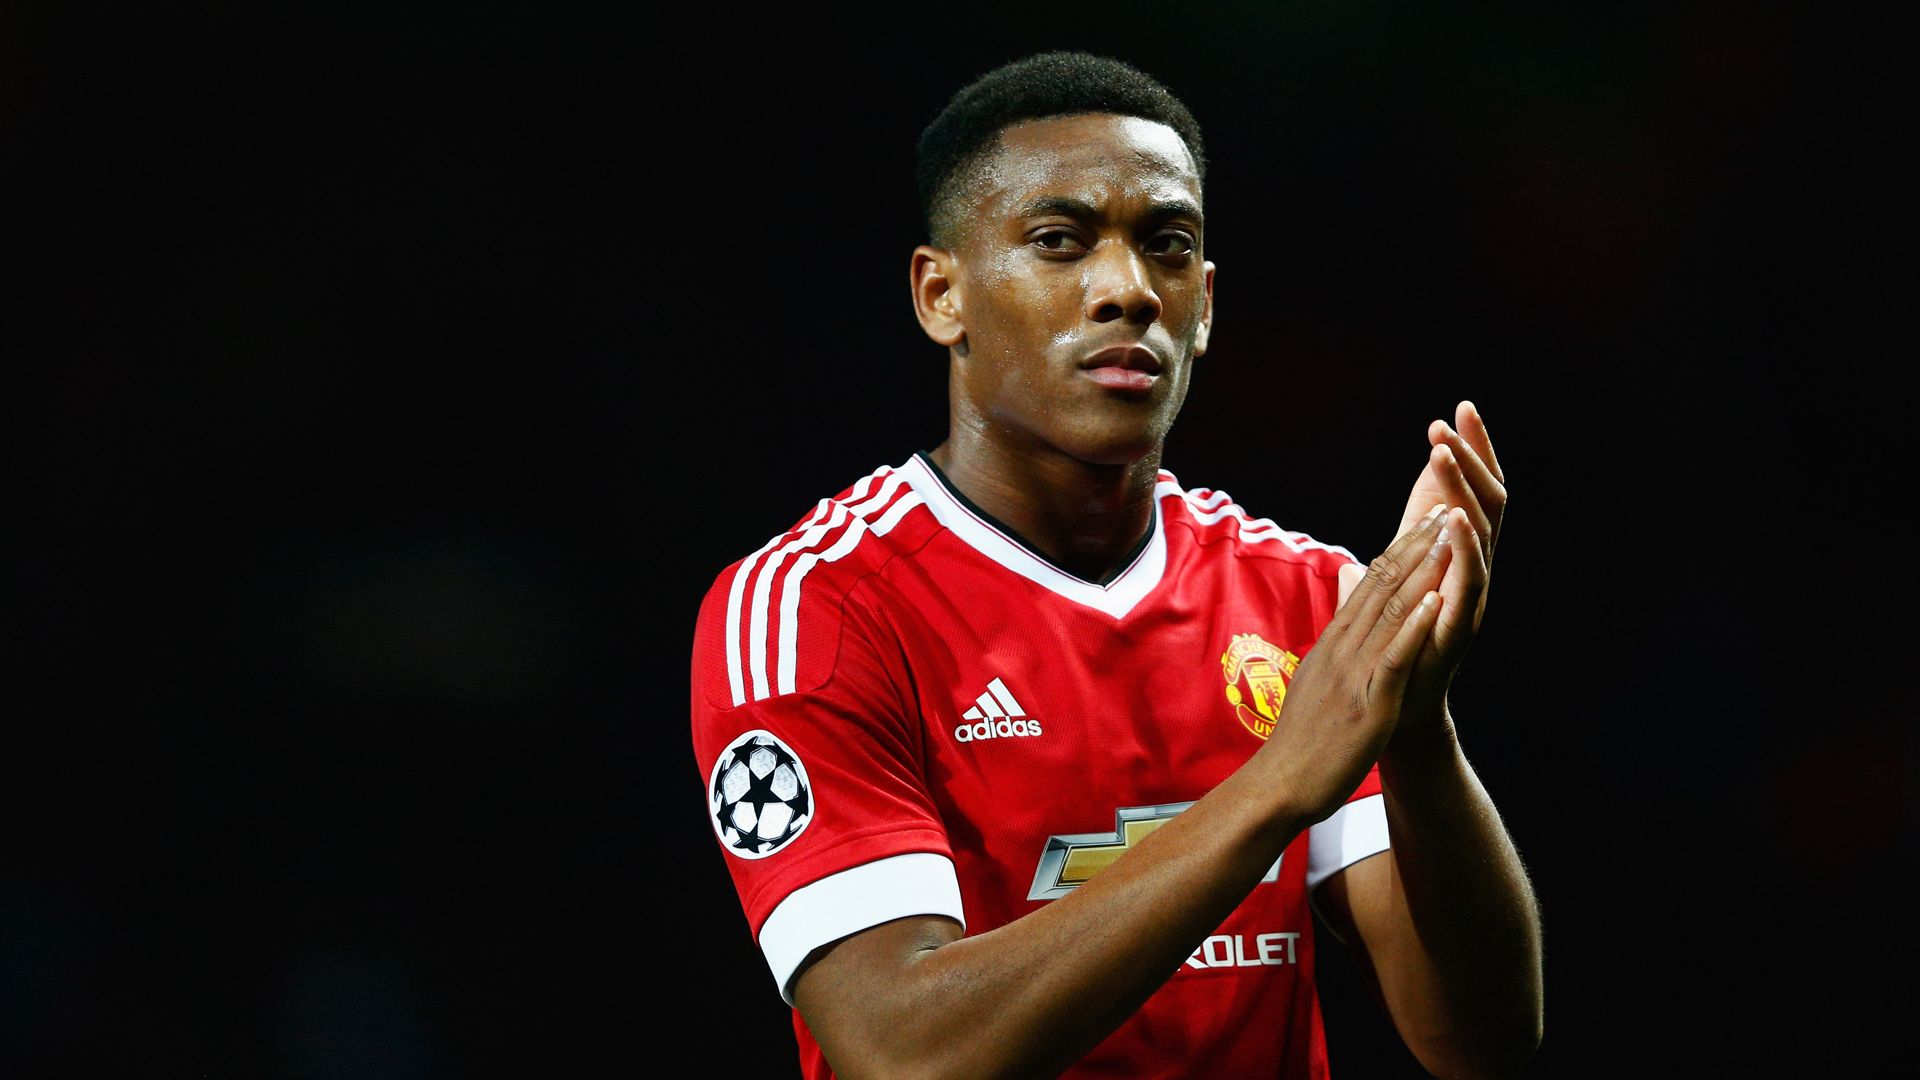 MANCHESTER, ENGLAND - SEPTEMBER 30:  Anthony Martial of Manchester United applauds the crowd after victory in the UEFA Champions League Group B match between Manchester United FC and VfL Wolfsburg at Old Trafford on September 30, 2015 in Manchester, United Kingdom.  (Photo by Dean Mouhtaropoulos/Getty Images)